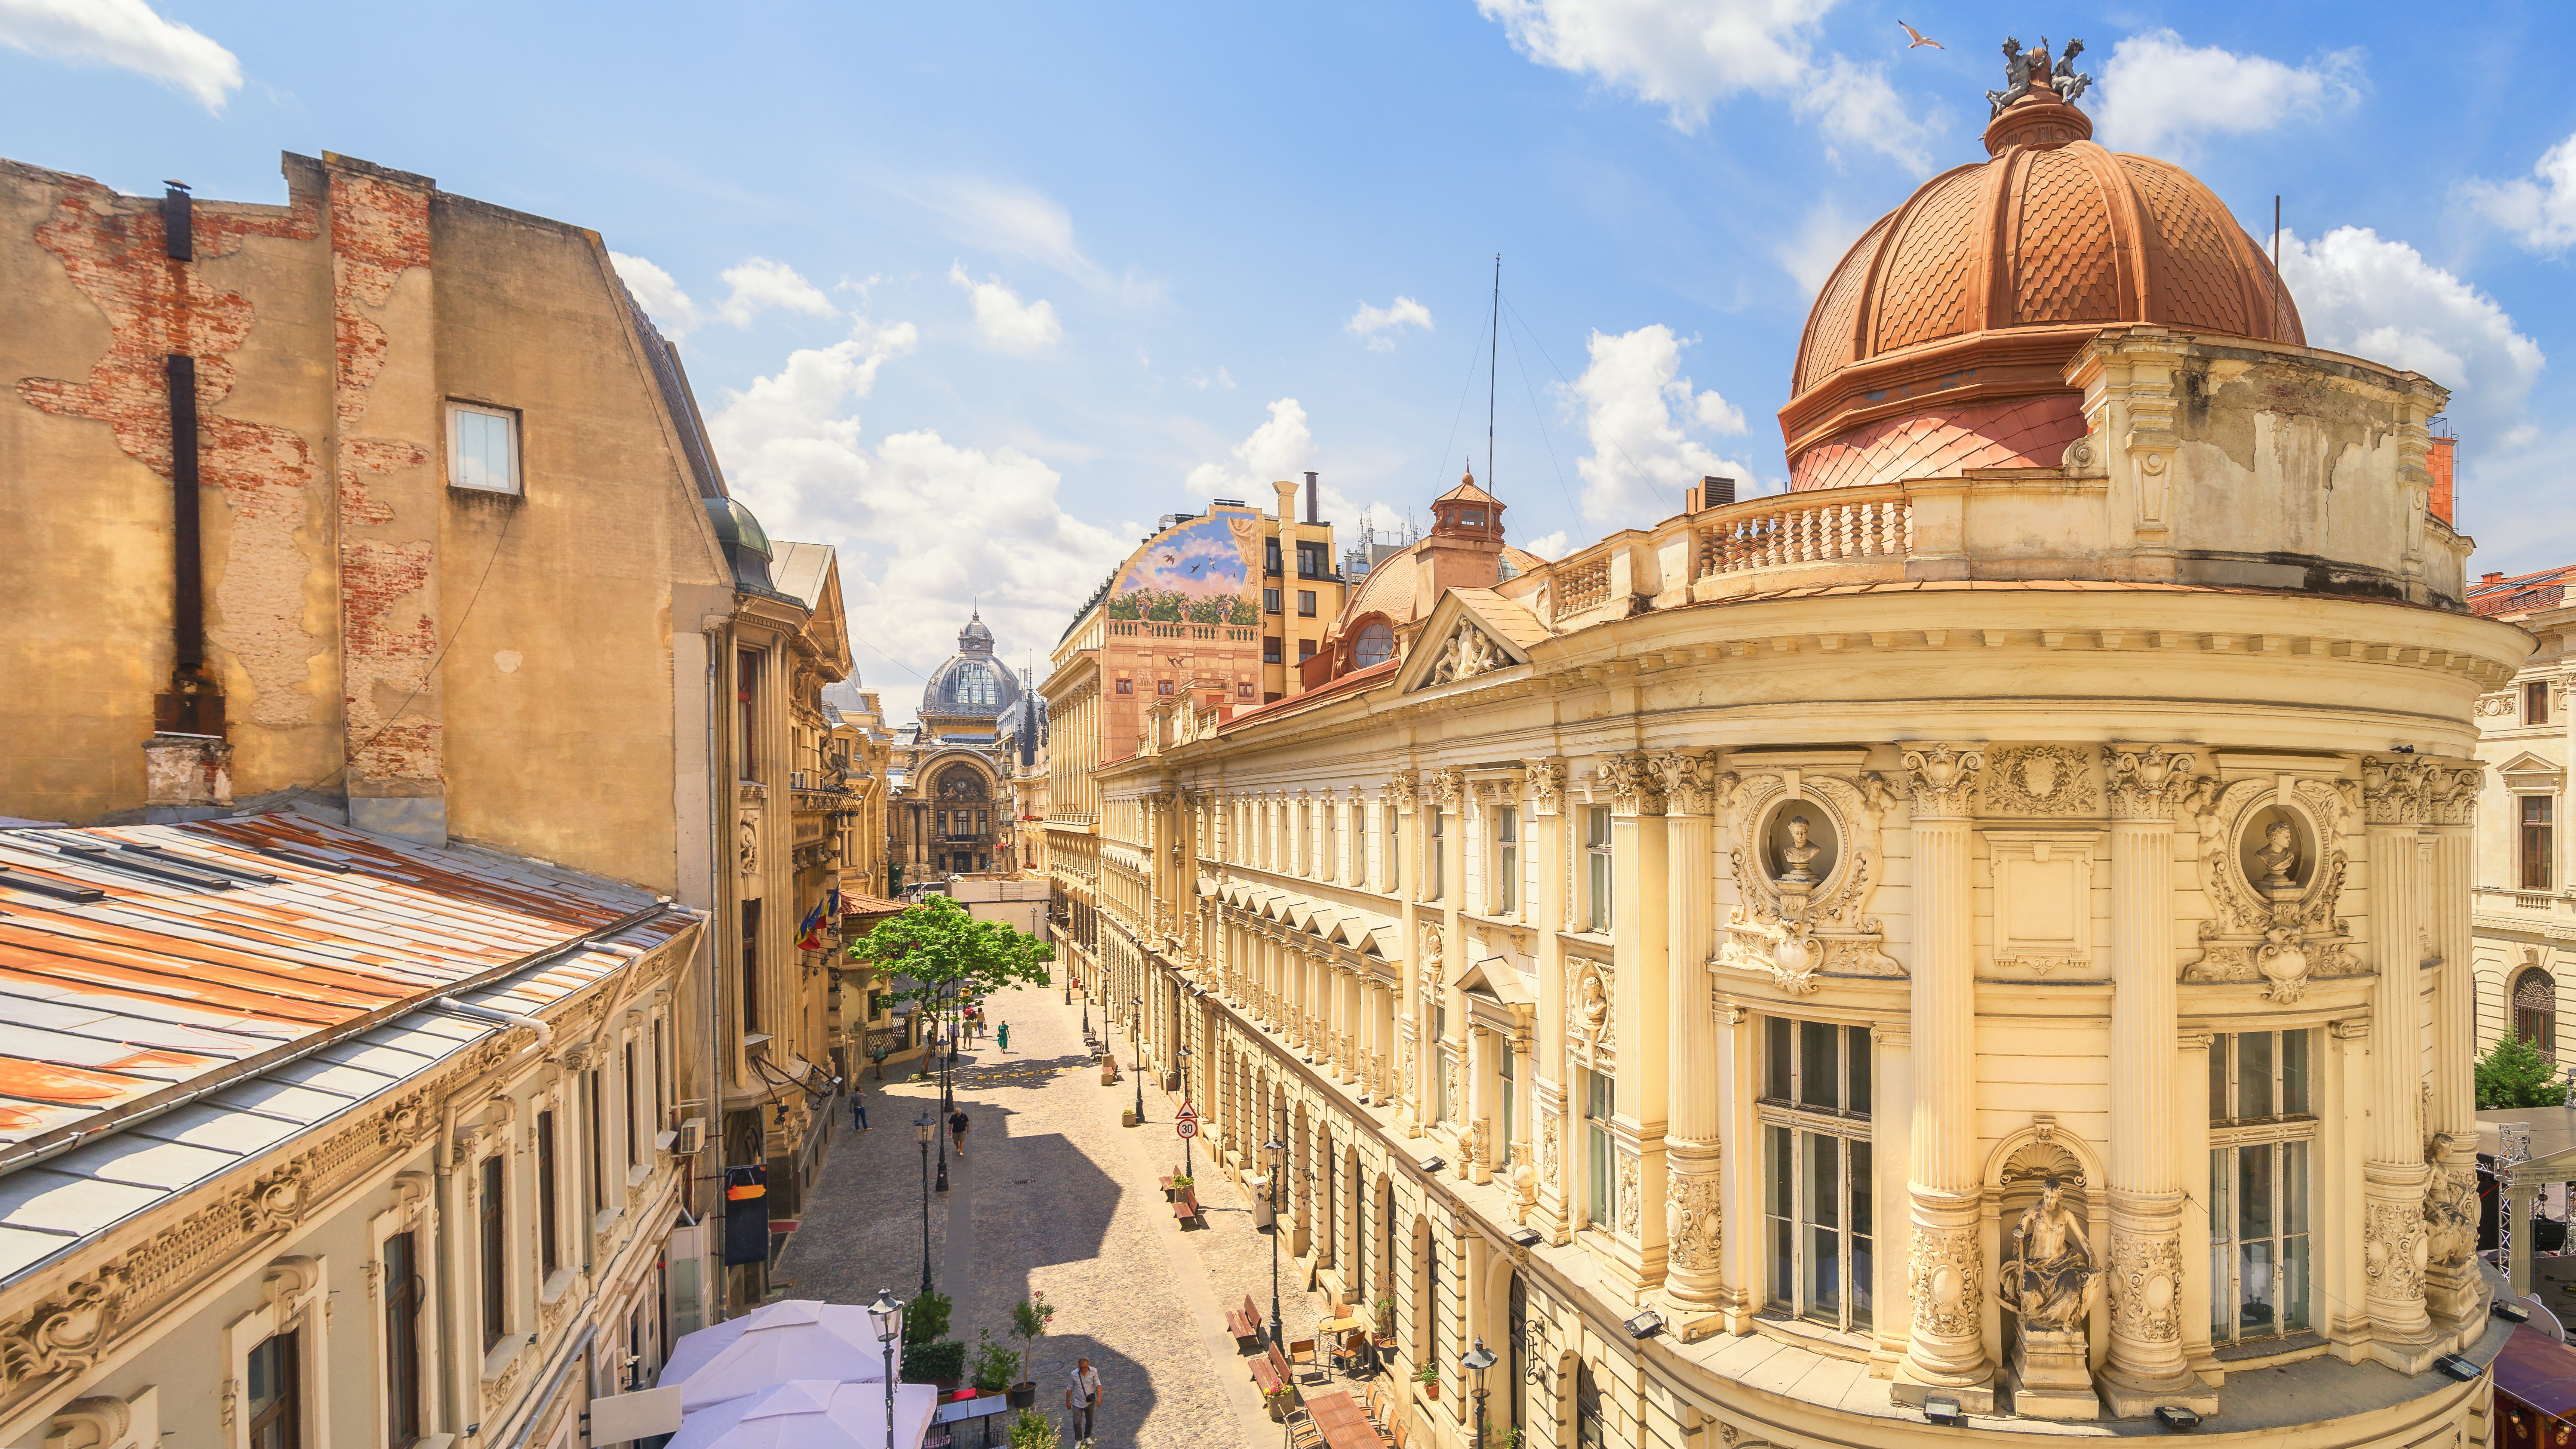 Bucharest Old Town looks radiant in the sun